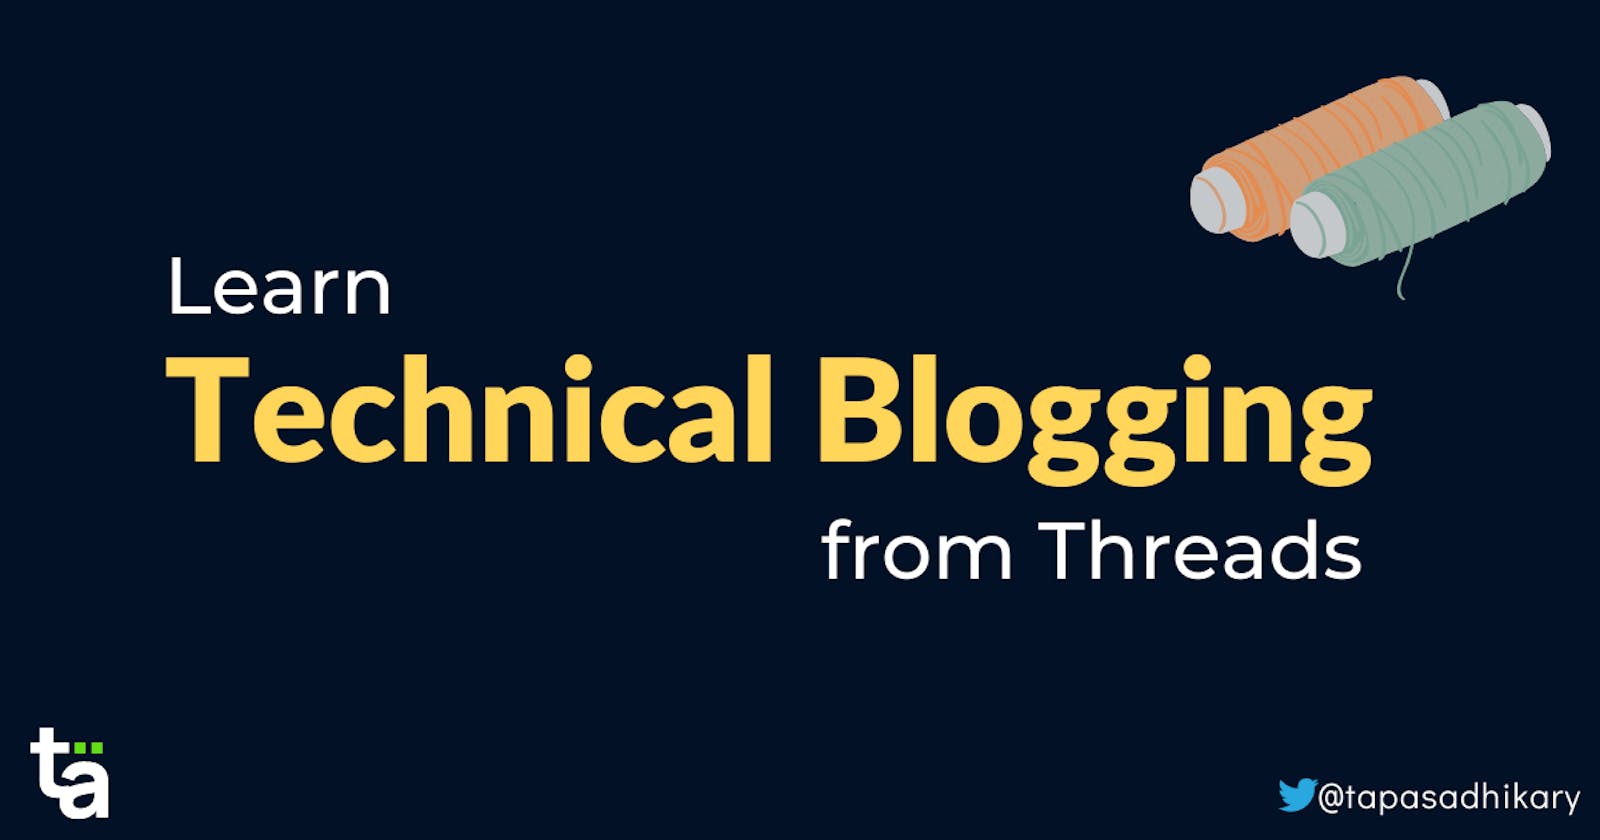 5 Twitter Threads to teach you about Technical Blogging